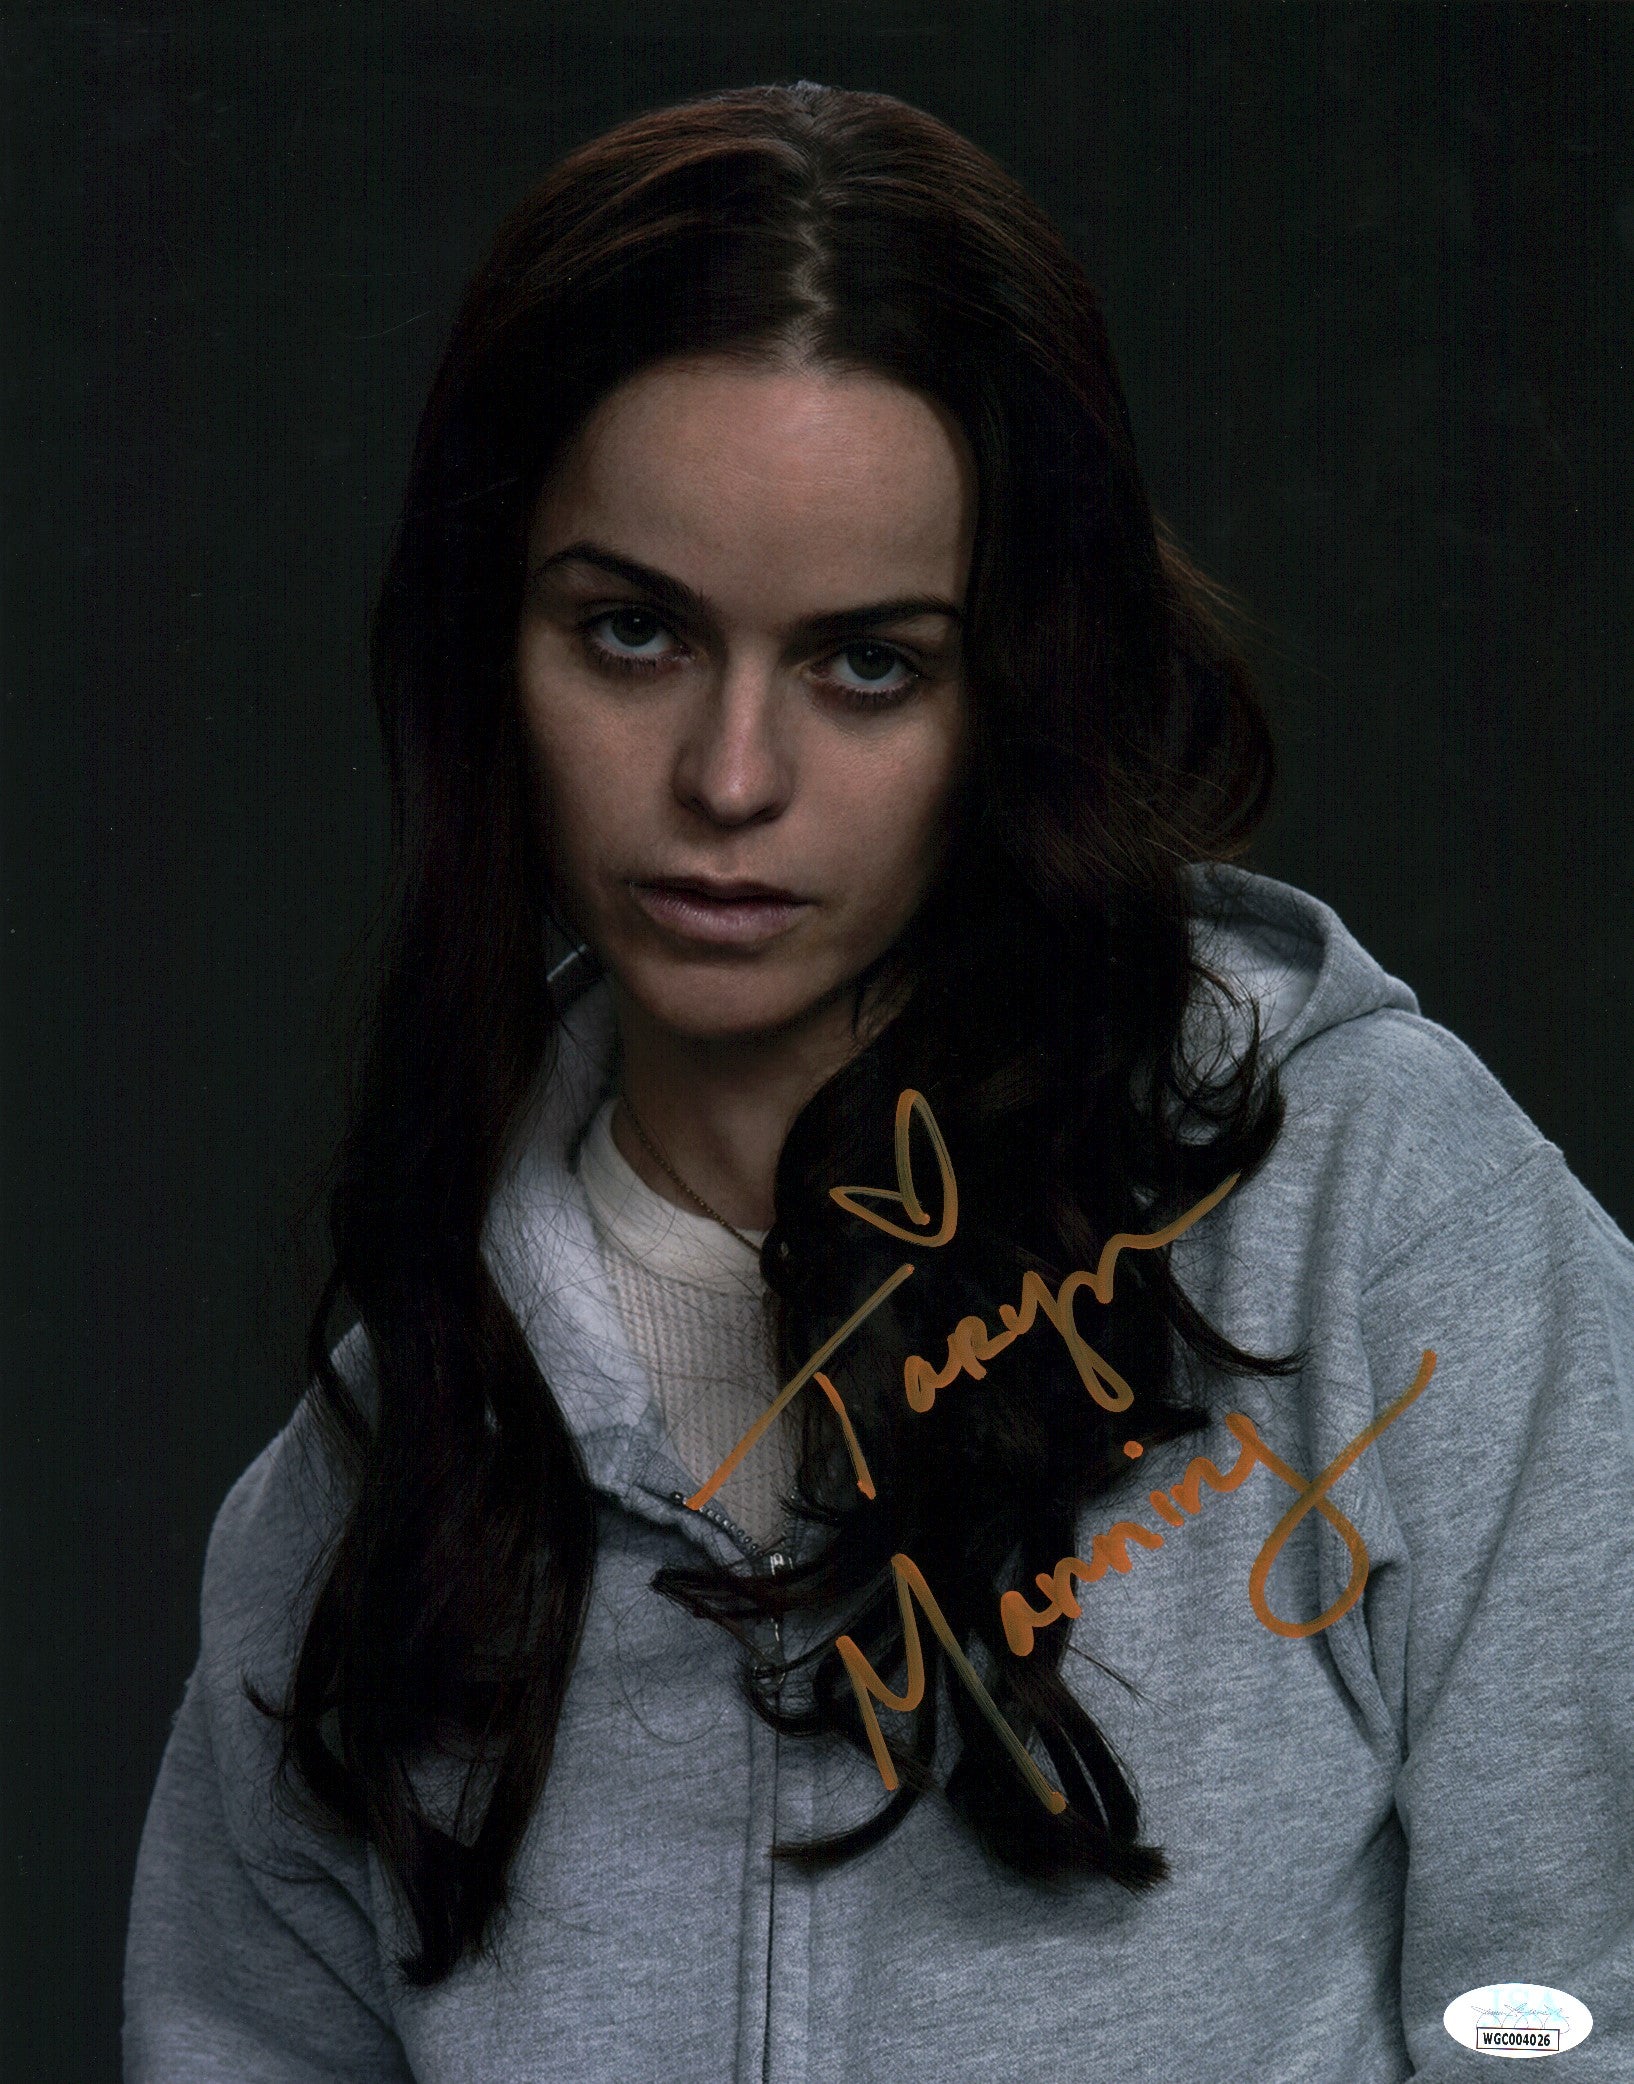 Taryn Manning Orange Is The New Black 11x14 Signed Photo Poster JSA Certified Autograph